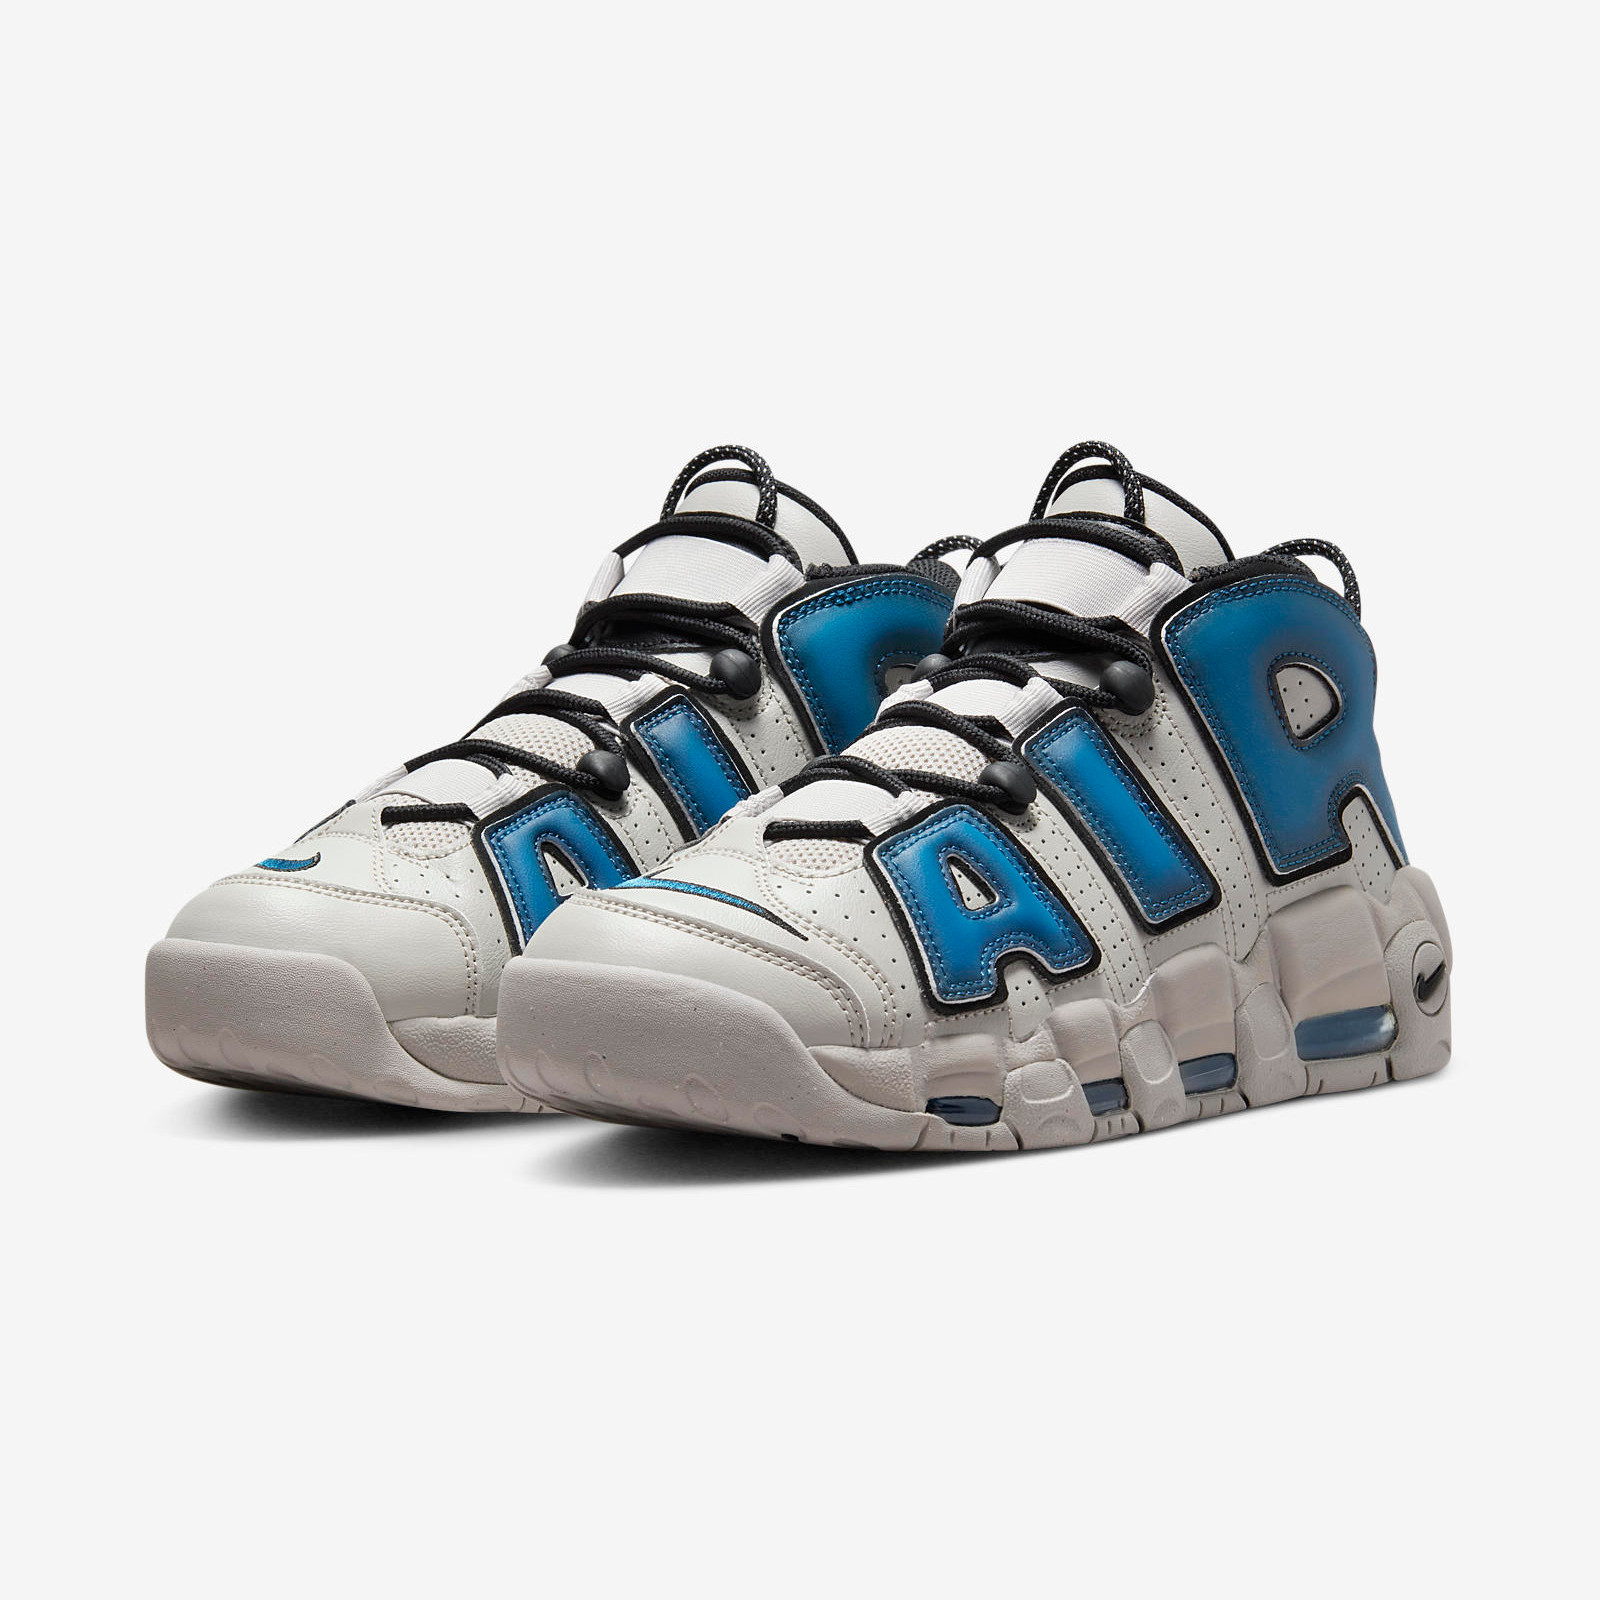 Nike Air More Uptempo
« Industrial Blue »